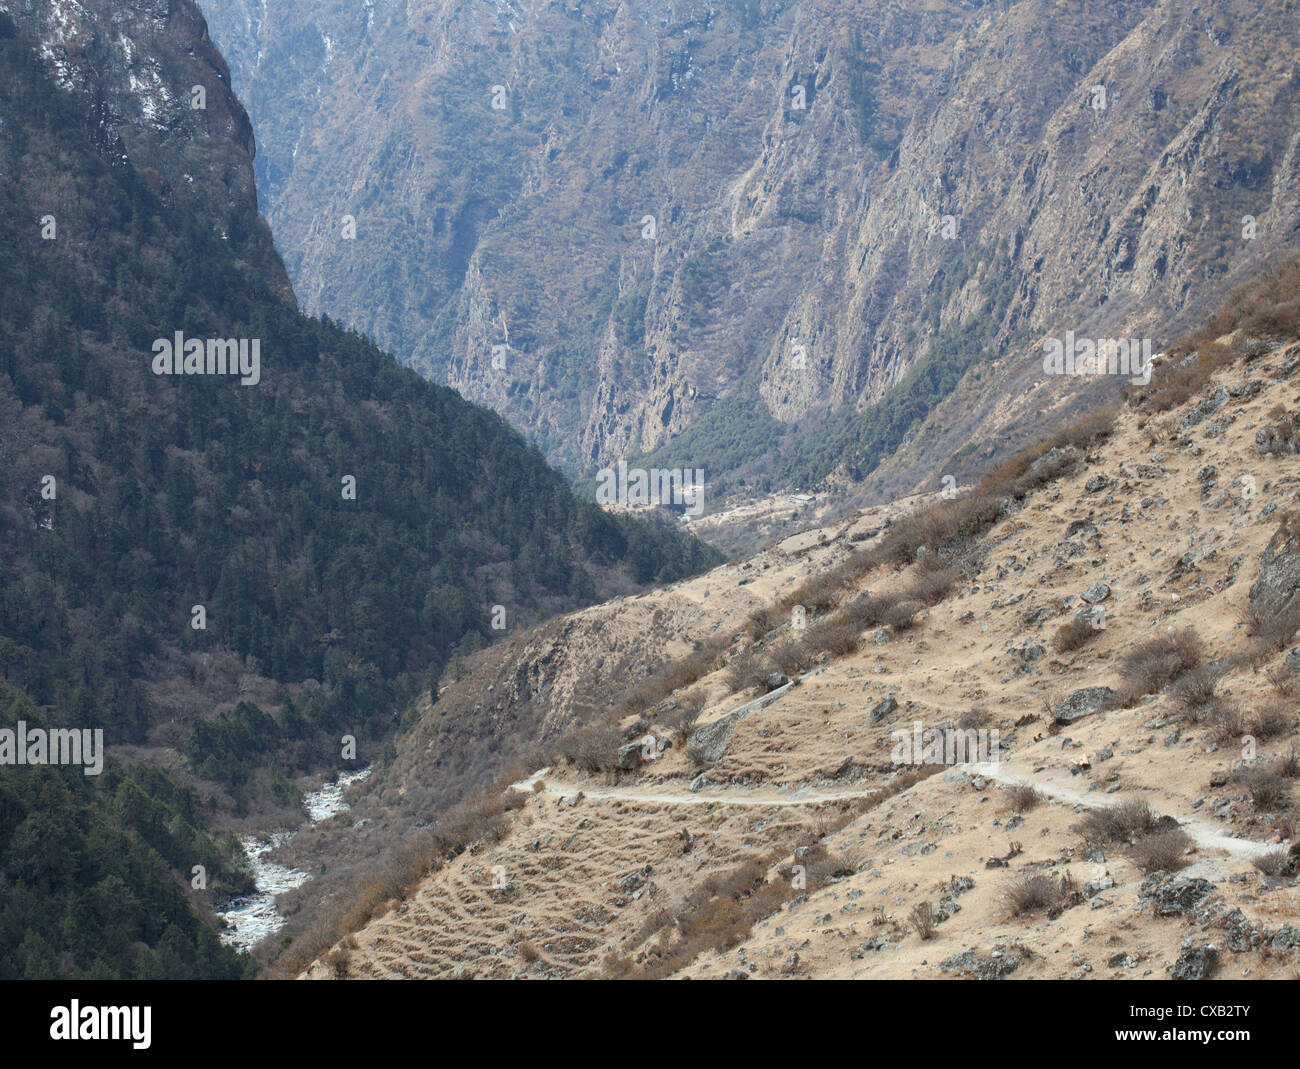 Trekking path and mountain river in the Langtang Valley, Nepal Stock Photo